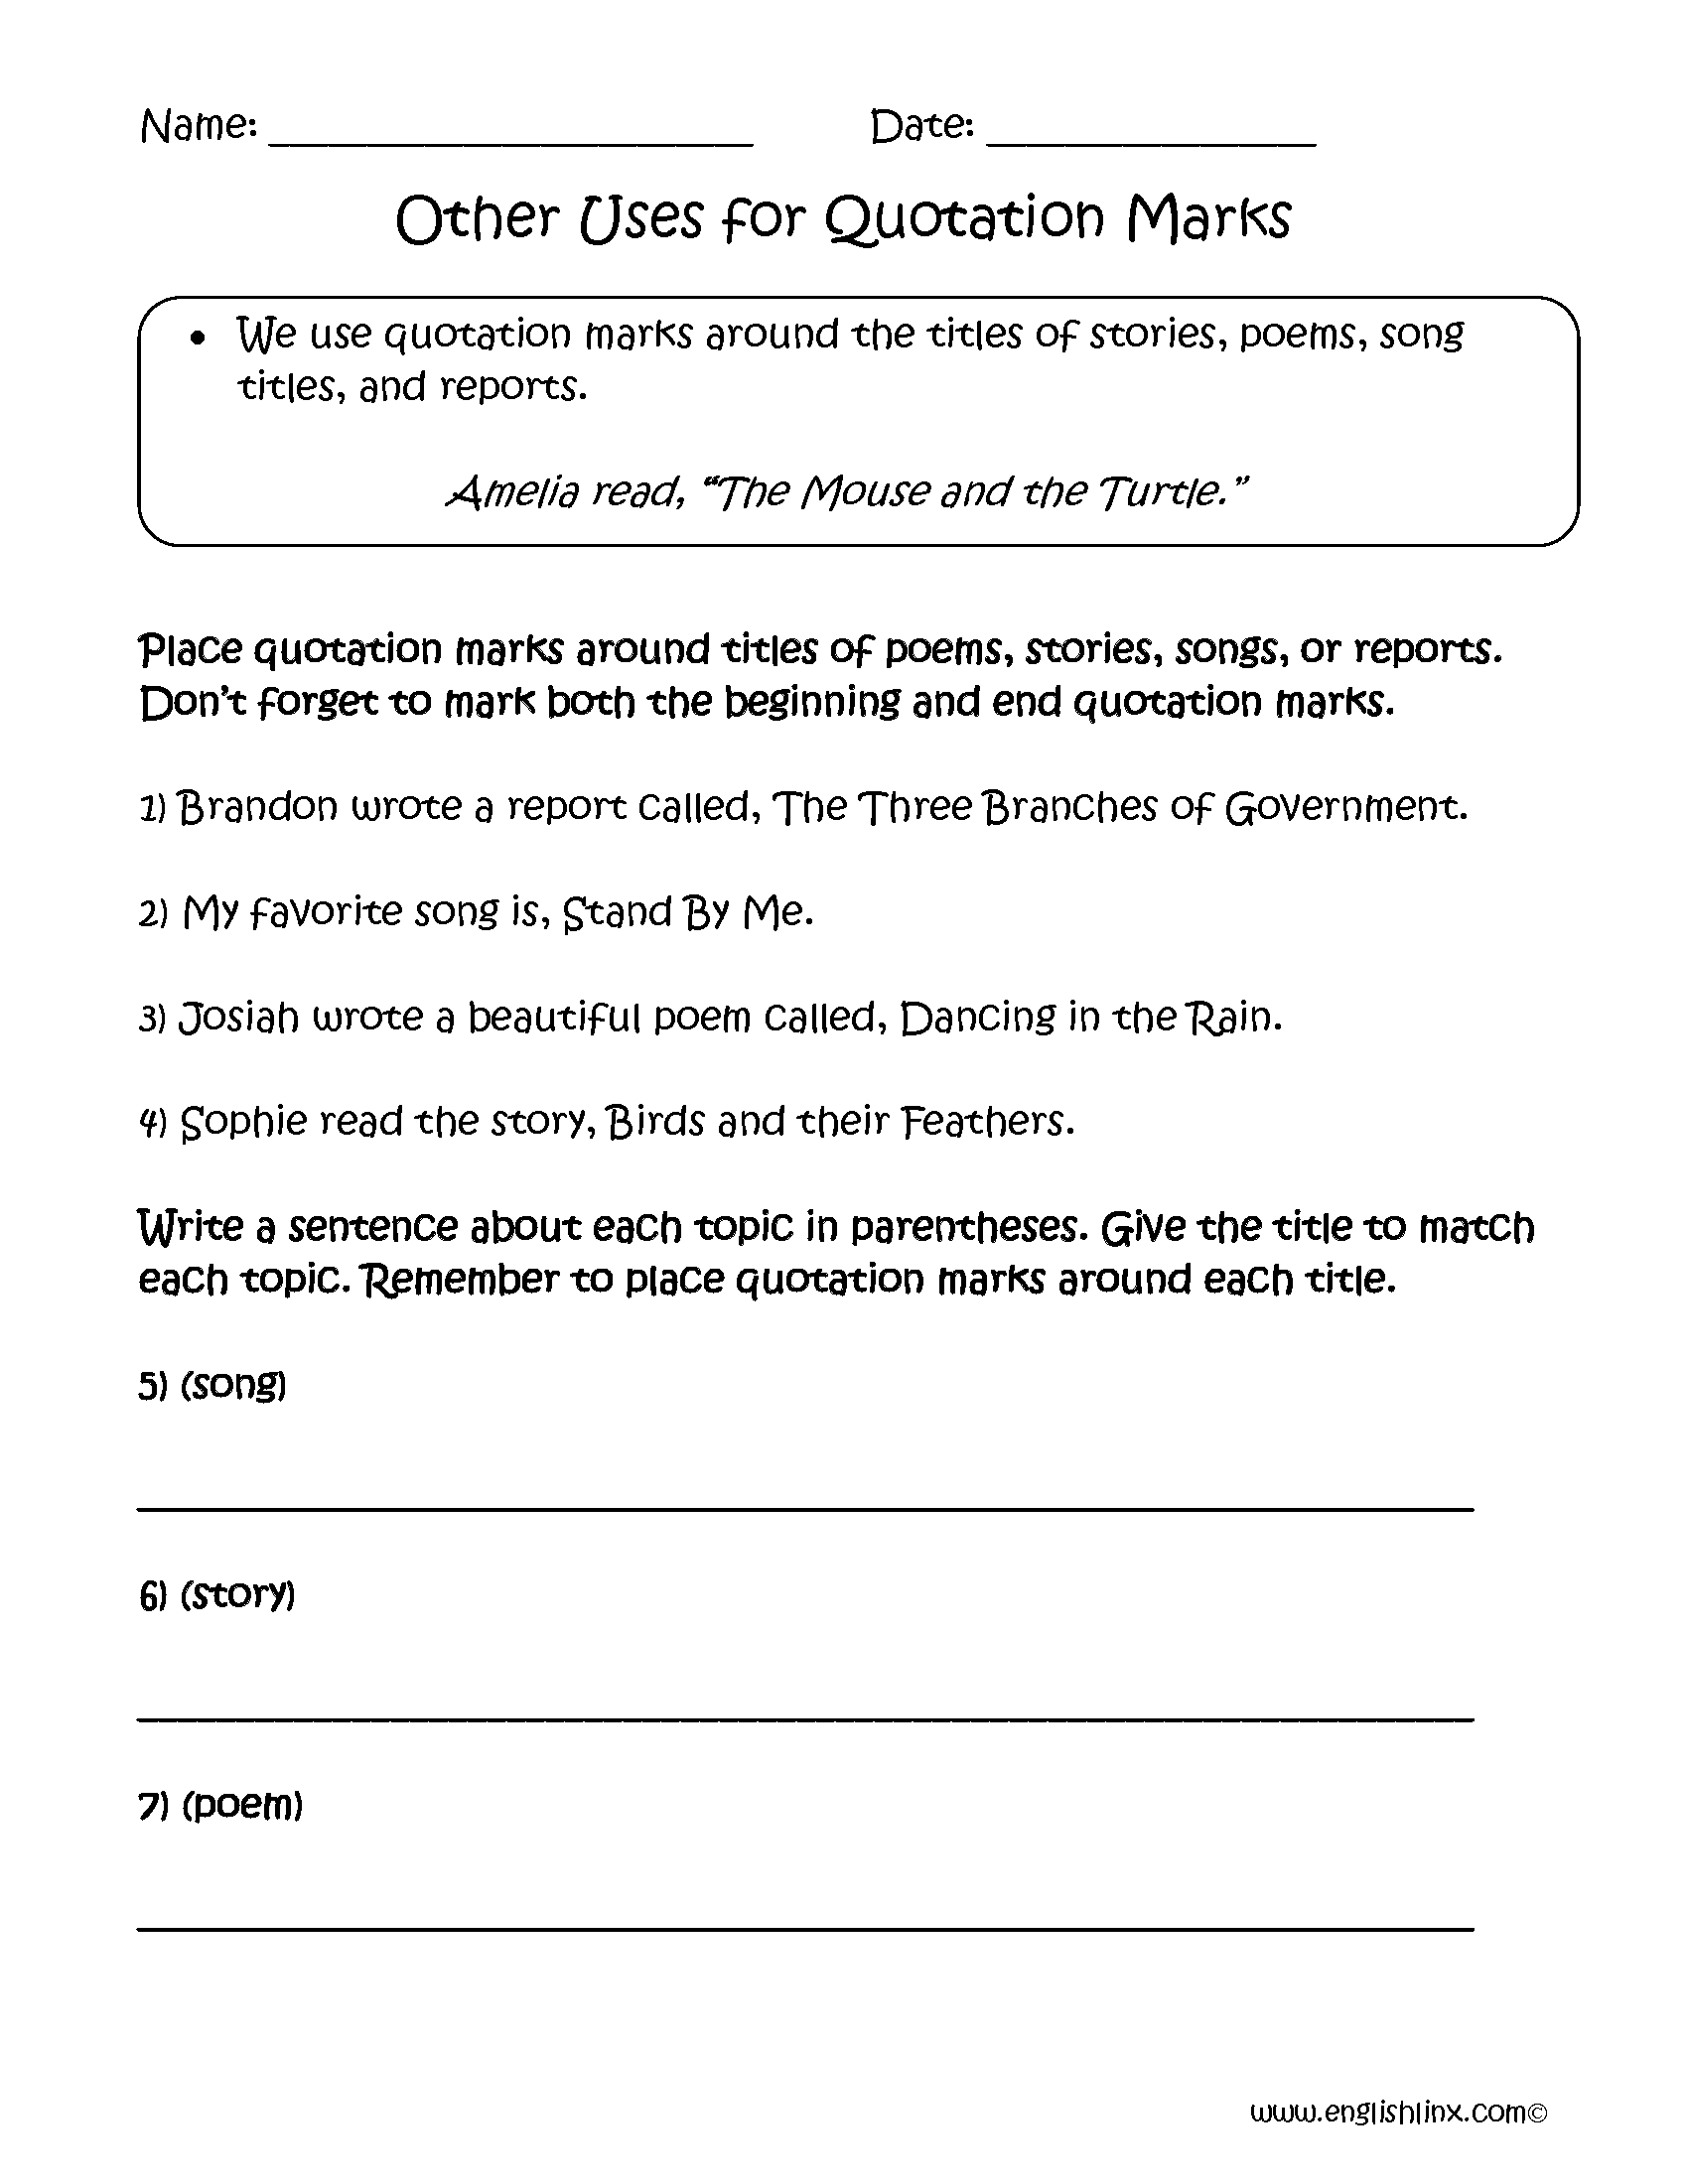 Uses for Quotation Marks Worksheets